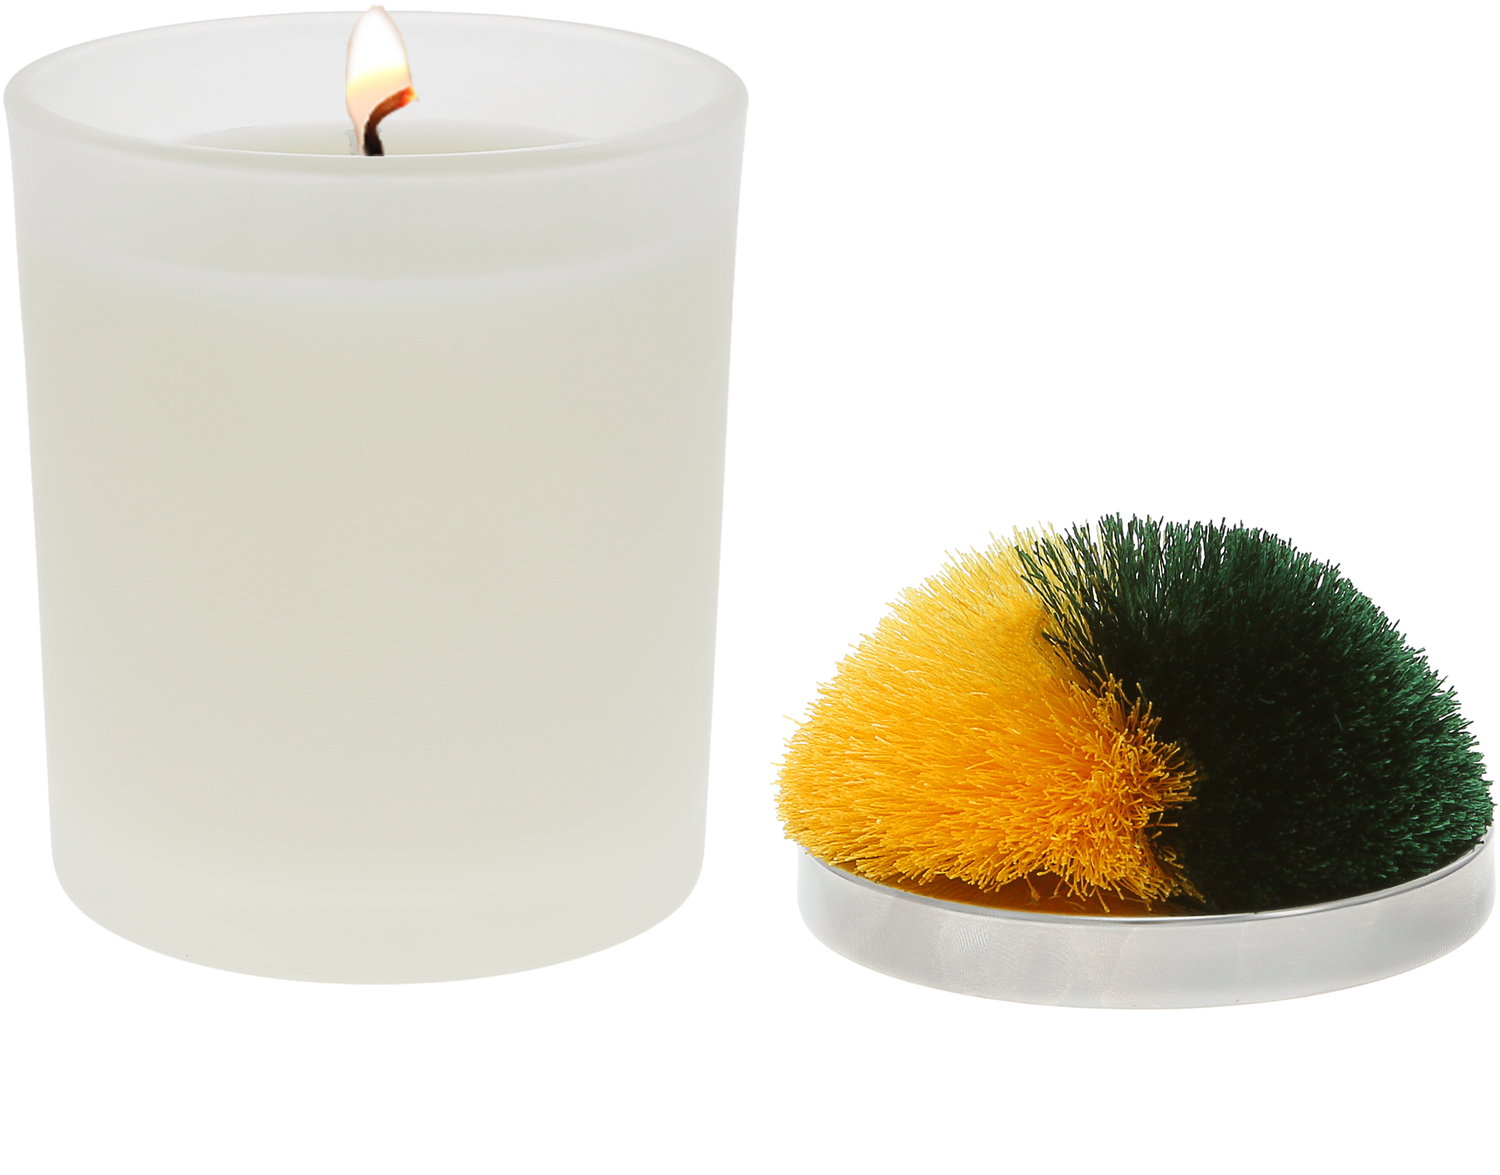 Blank - Green & Yellow by Repre-Scent - Blank - Green & Yellow - 5.5 oz - 100% Soy Wax Candle with Pom Pom Lid
Scent: Tranquility